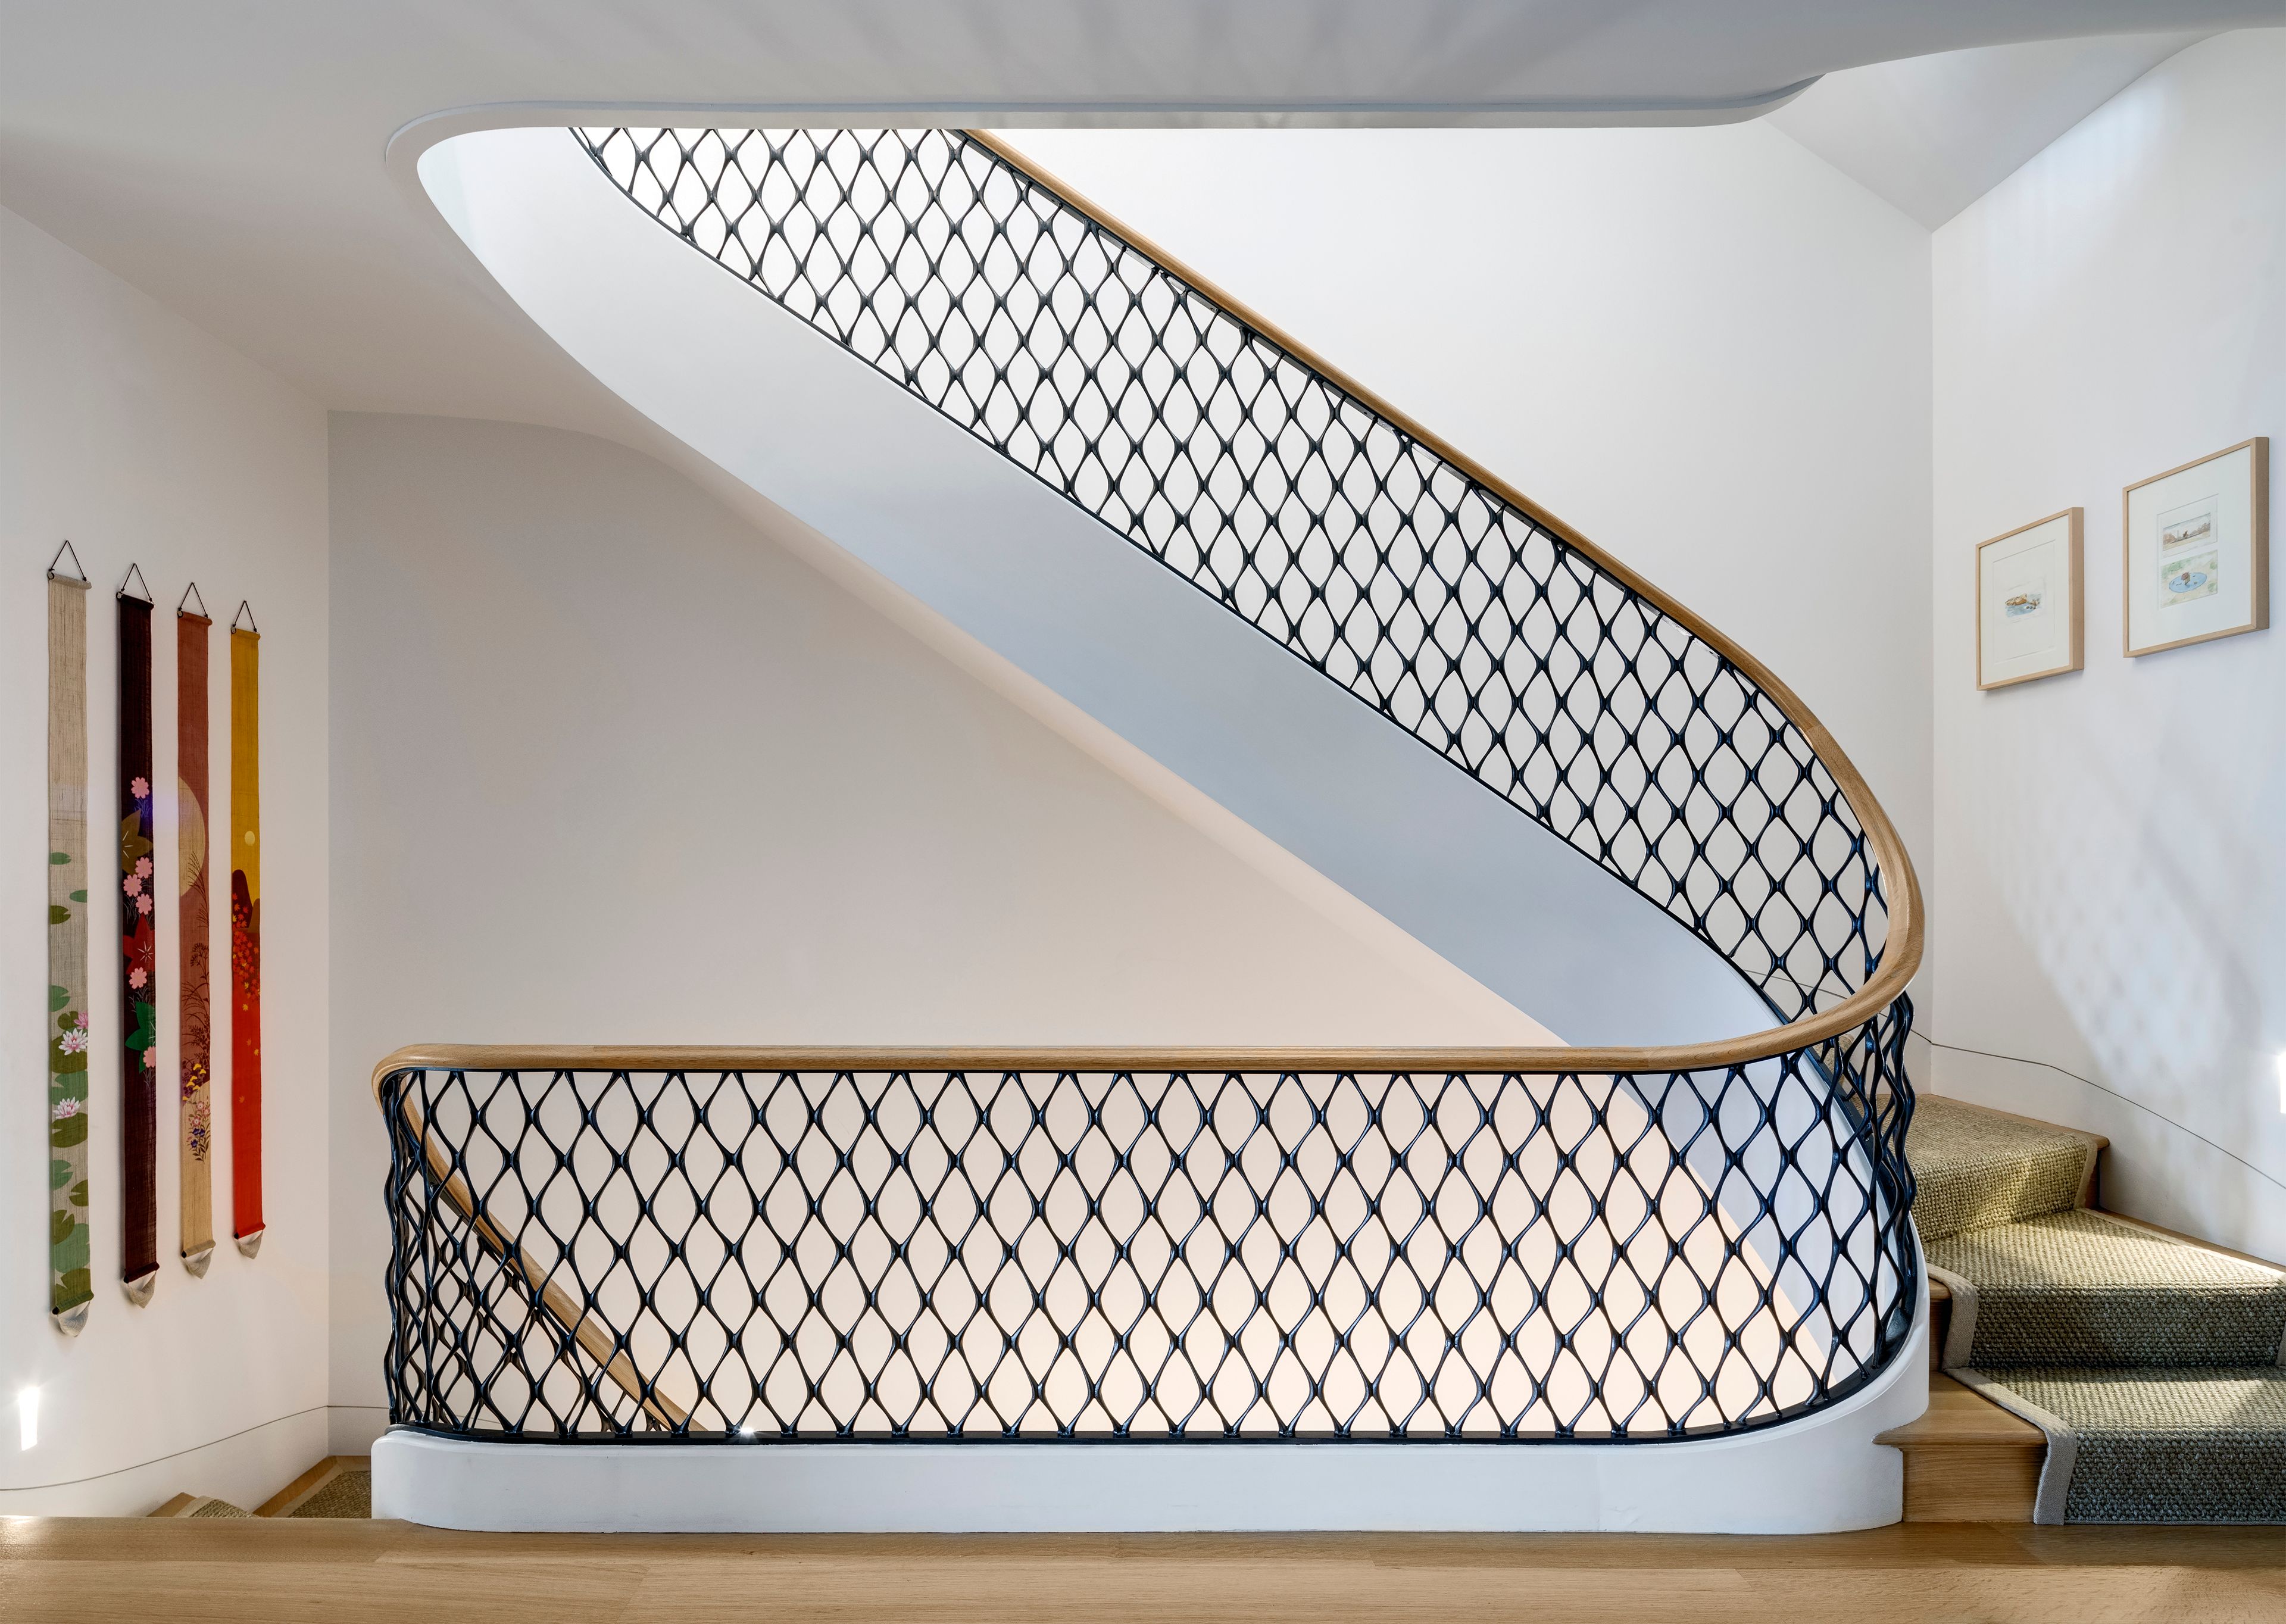 The Brooklyn Studio Chelsea Rowhouse Staircase